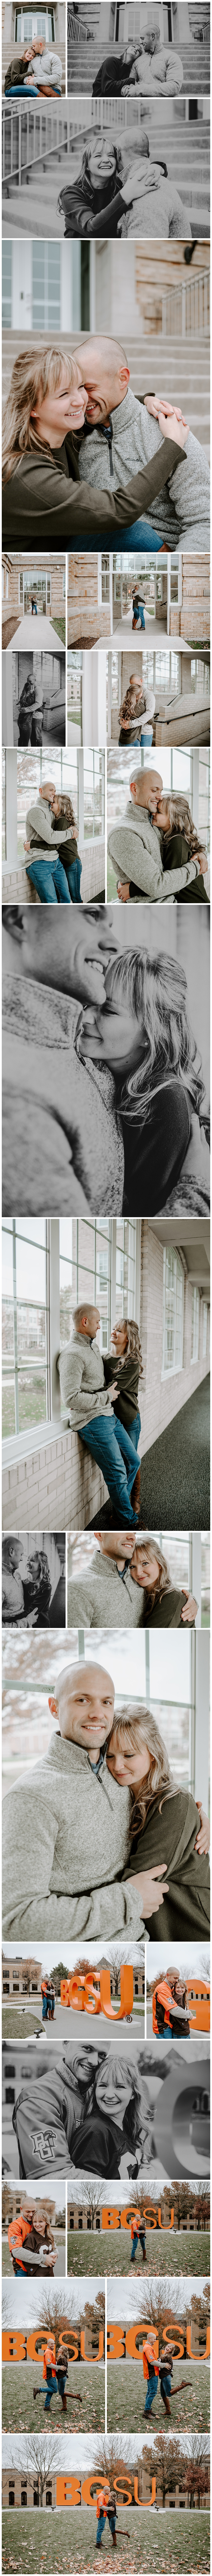 Claire + Aaron | Bowling Green State University | Bowling Green, Ohio | Couples, Engagement | Shannen Arnett Photography